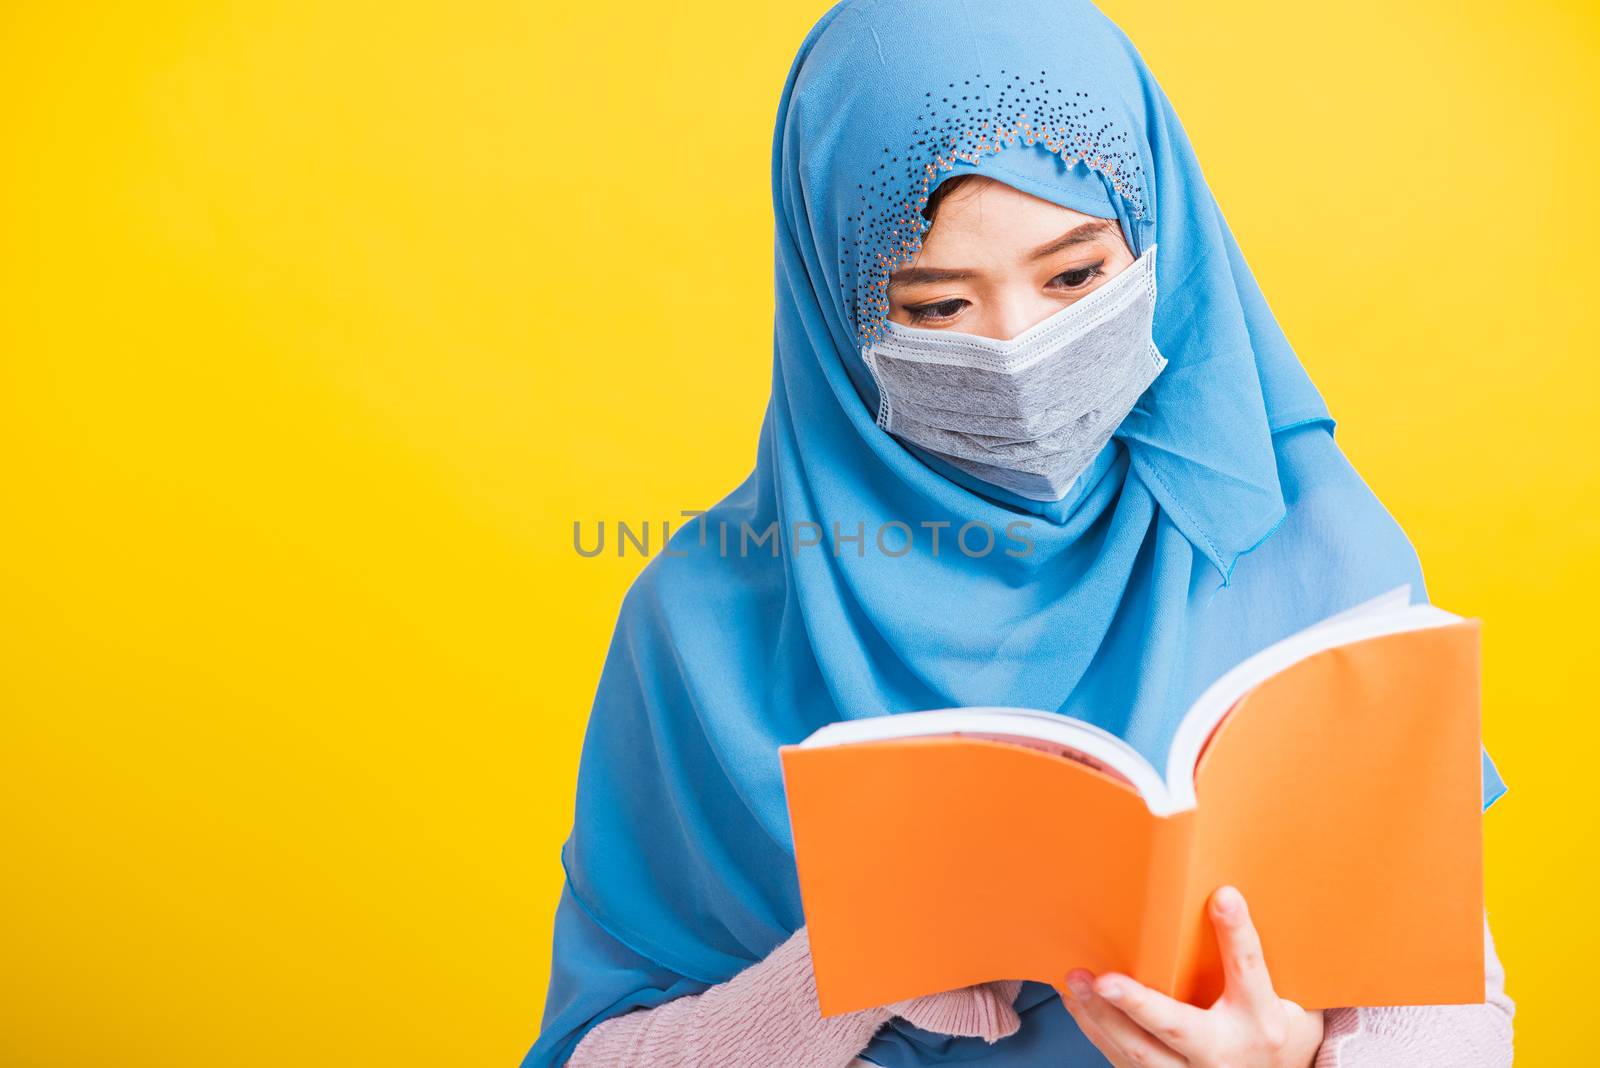 Asian Muslim Arab, Portrait of happy beautiful young woman religious wear veil hijab and face mask protective to prevent coronavirus she hold book on hand and open reding it on yellow, Back to college